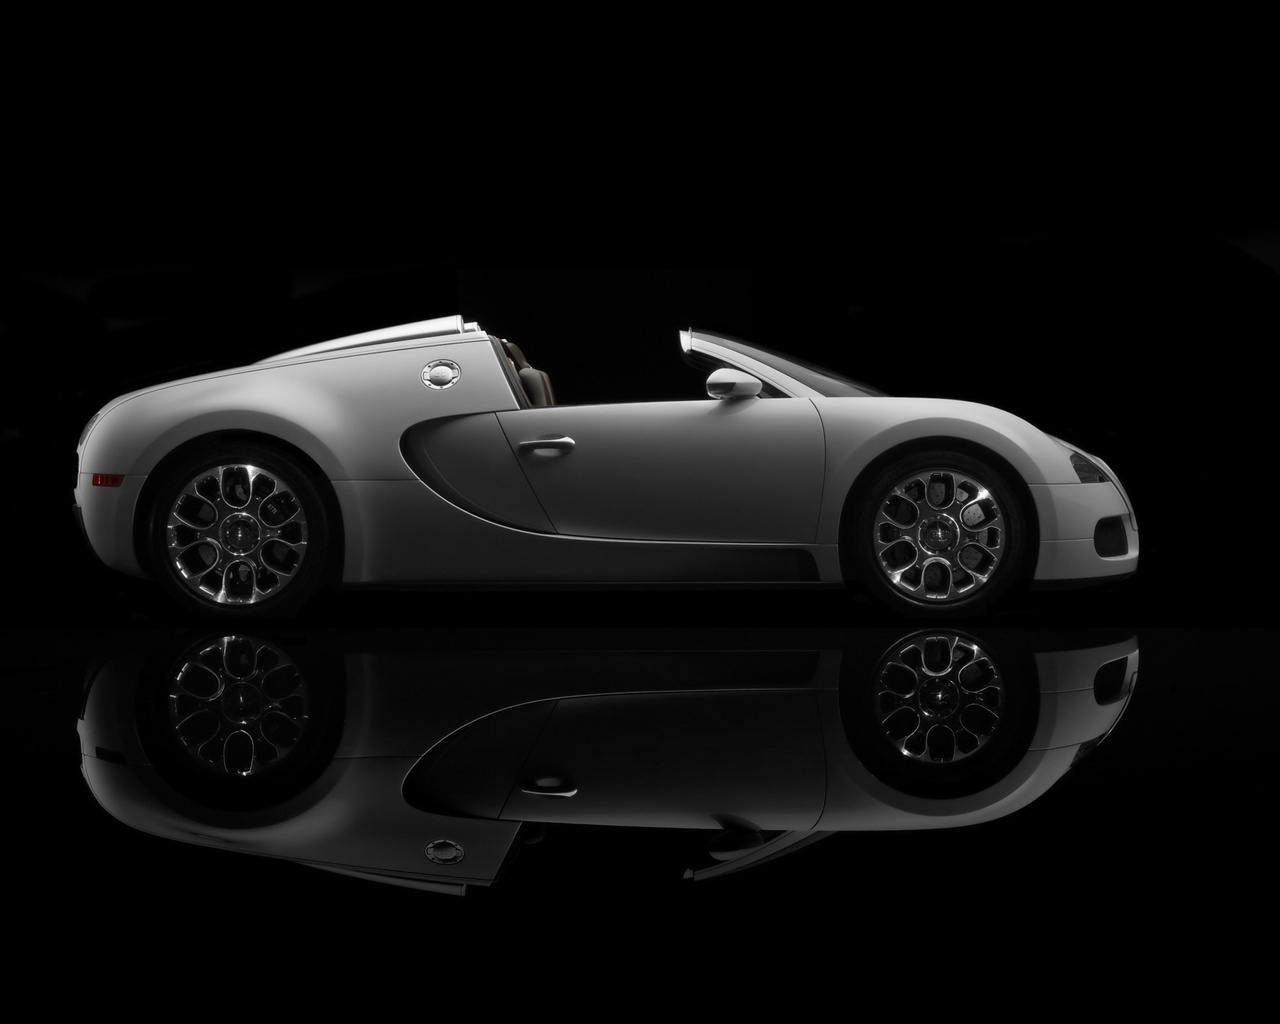 Bugatti Veyron 16.4 Grand Sport Production 2009 Version - Side Topless for 1280 x 1024 resolution